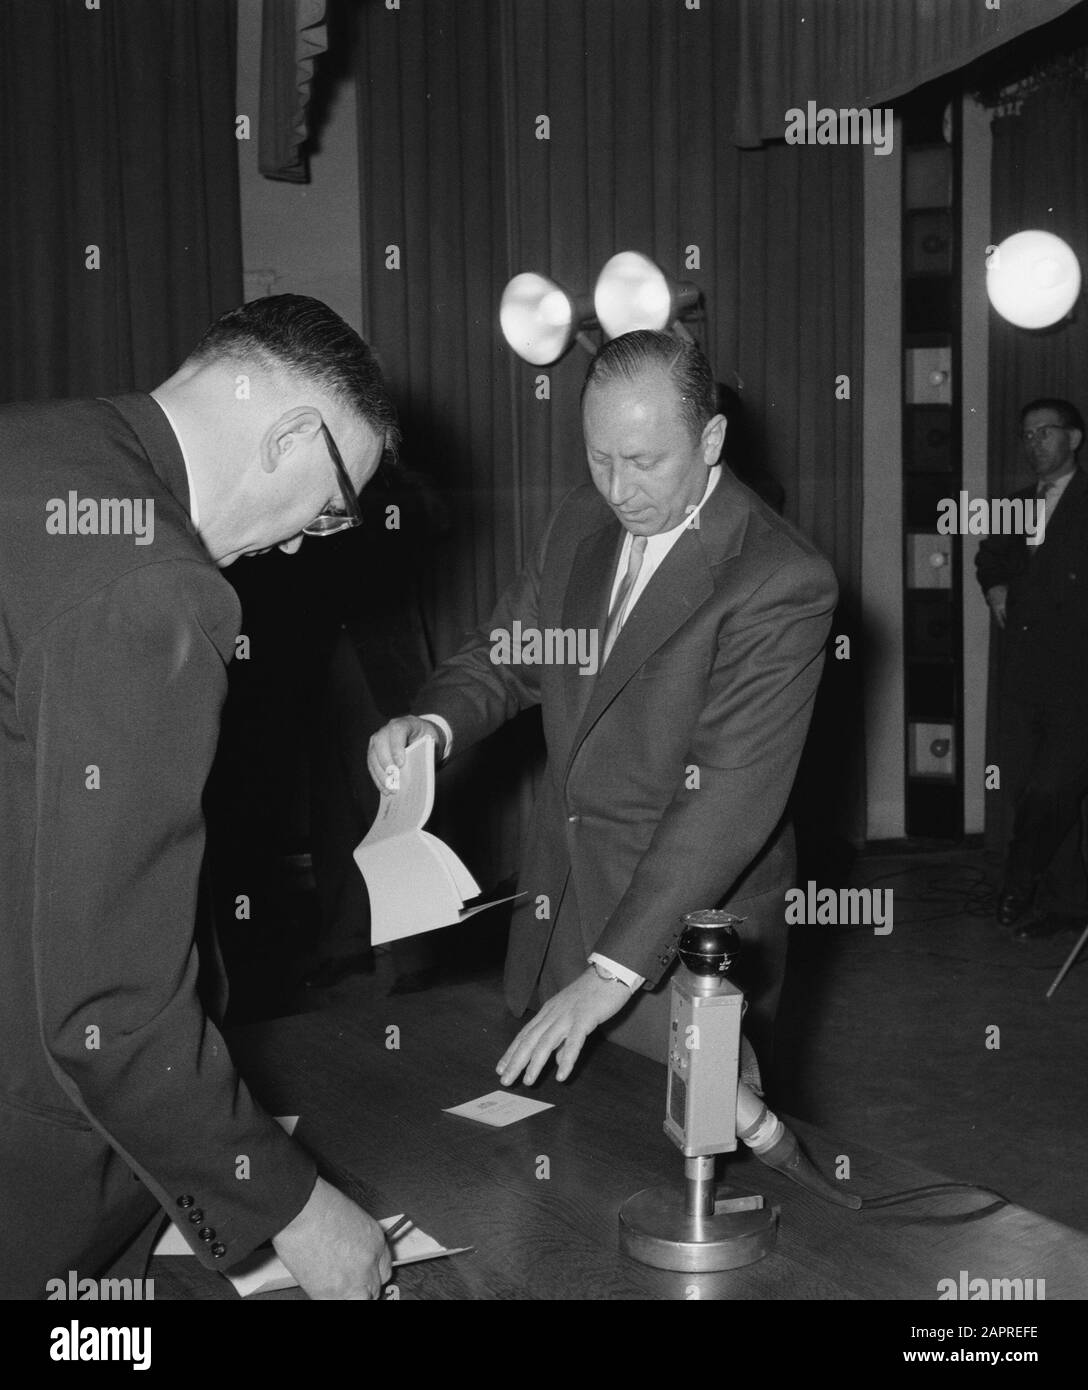 Loting World Chess Candidates Tournament Amsterdam Date: March 26, 1956 Location: Amsterdam, Noord-Holland Keywords: candidates, chess Stock Photo